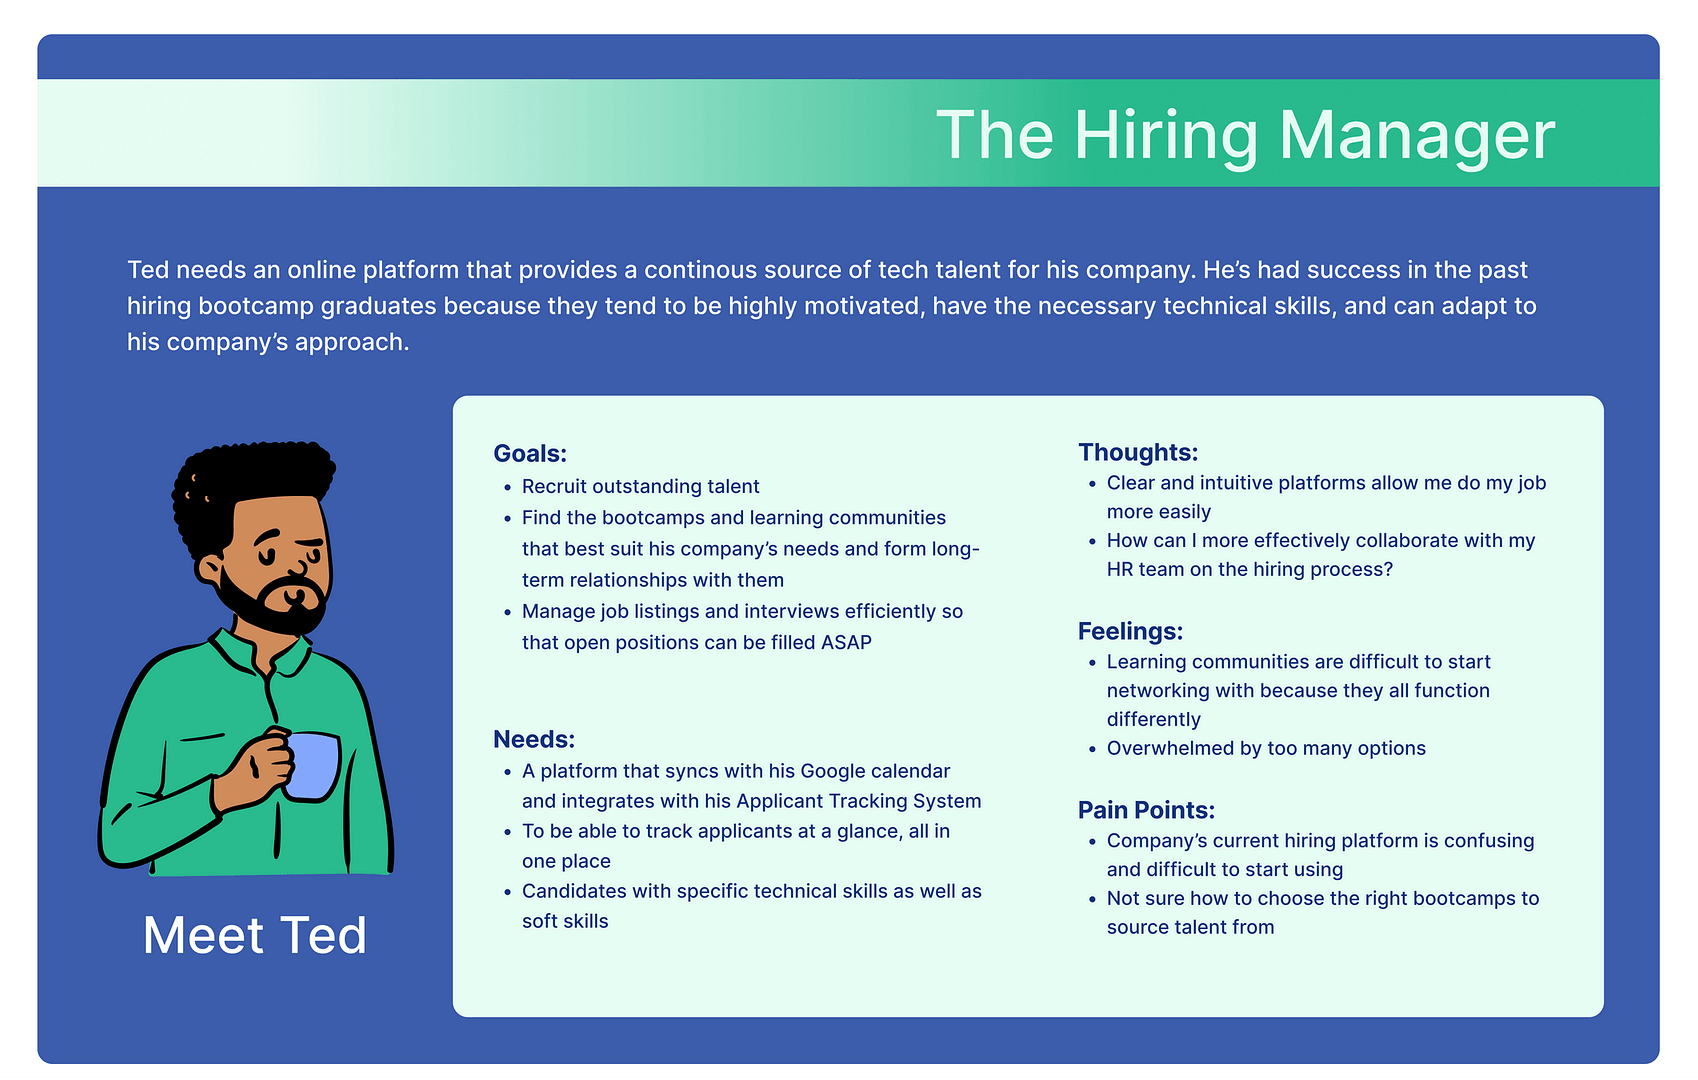 User archetype chart titled 'The Hiring Manager', with a cartoon picture of a black man and the caption 'Meet Ted', an introduction, and categories of information about Ted.